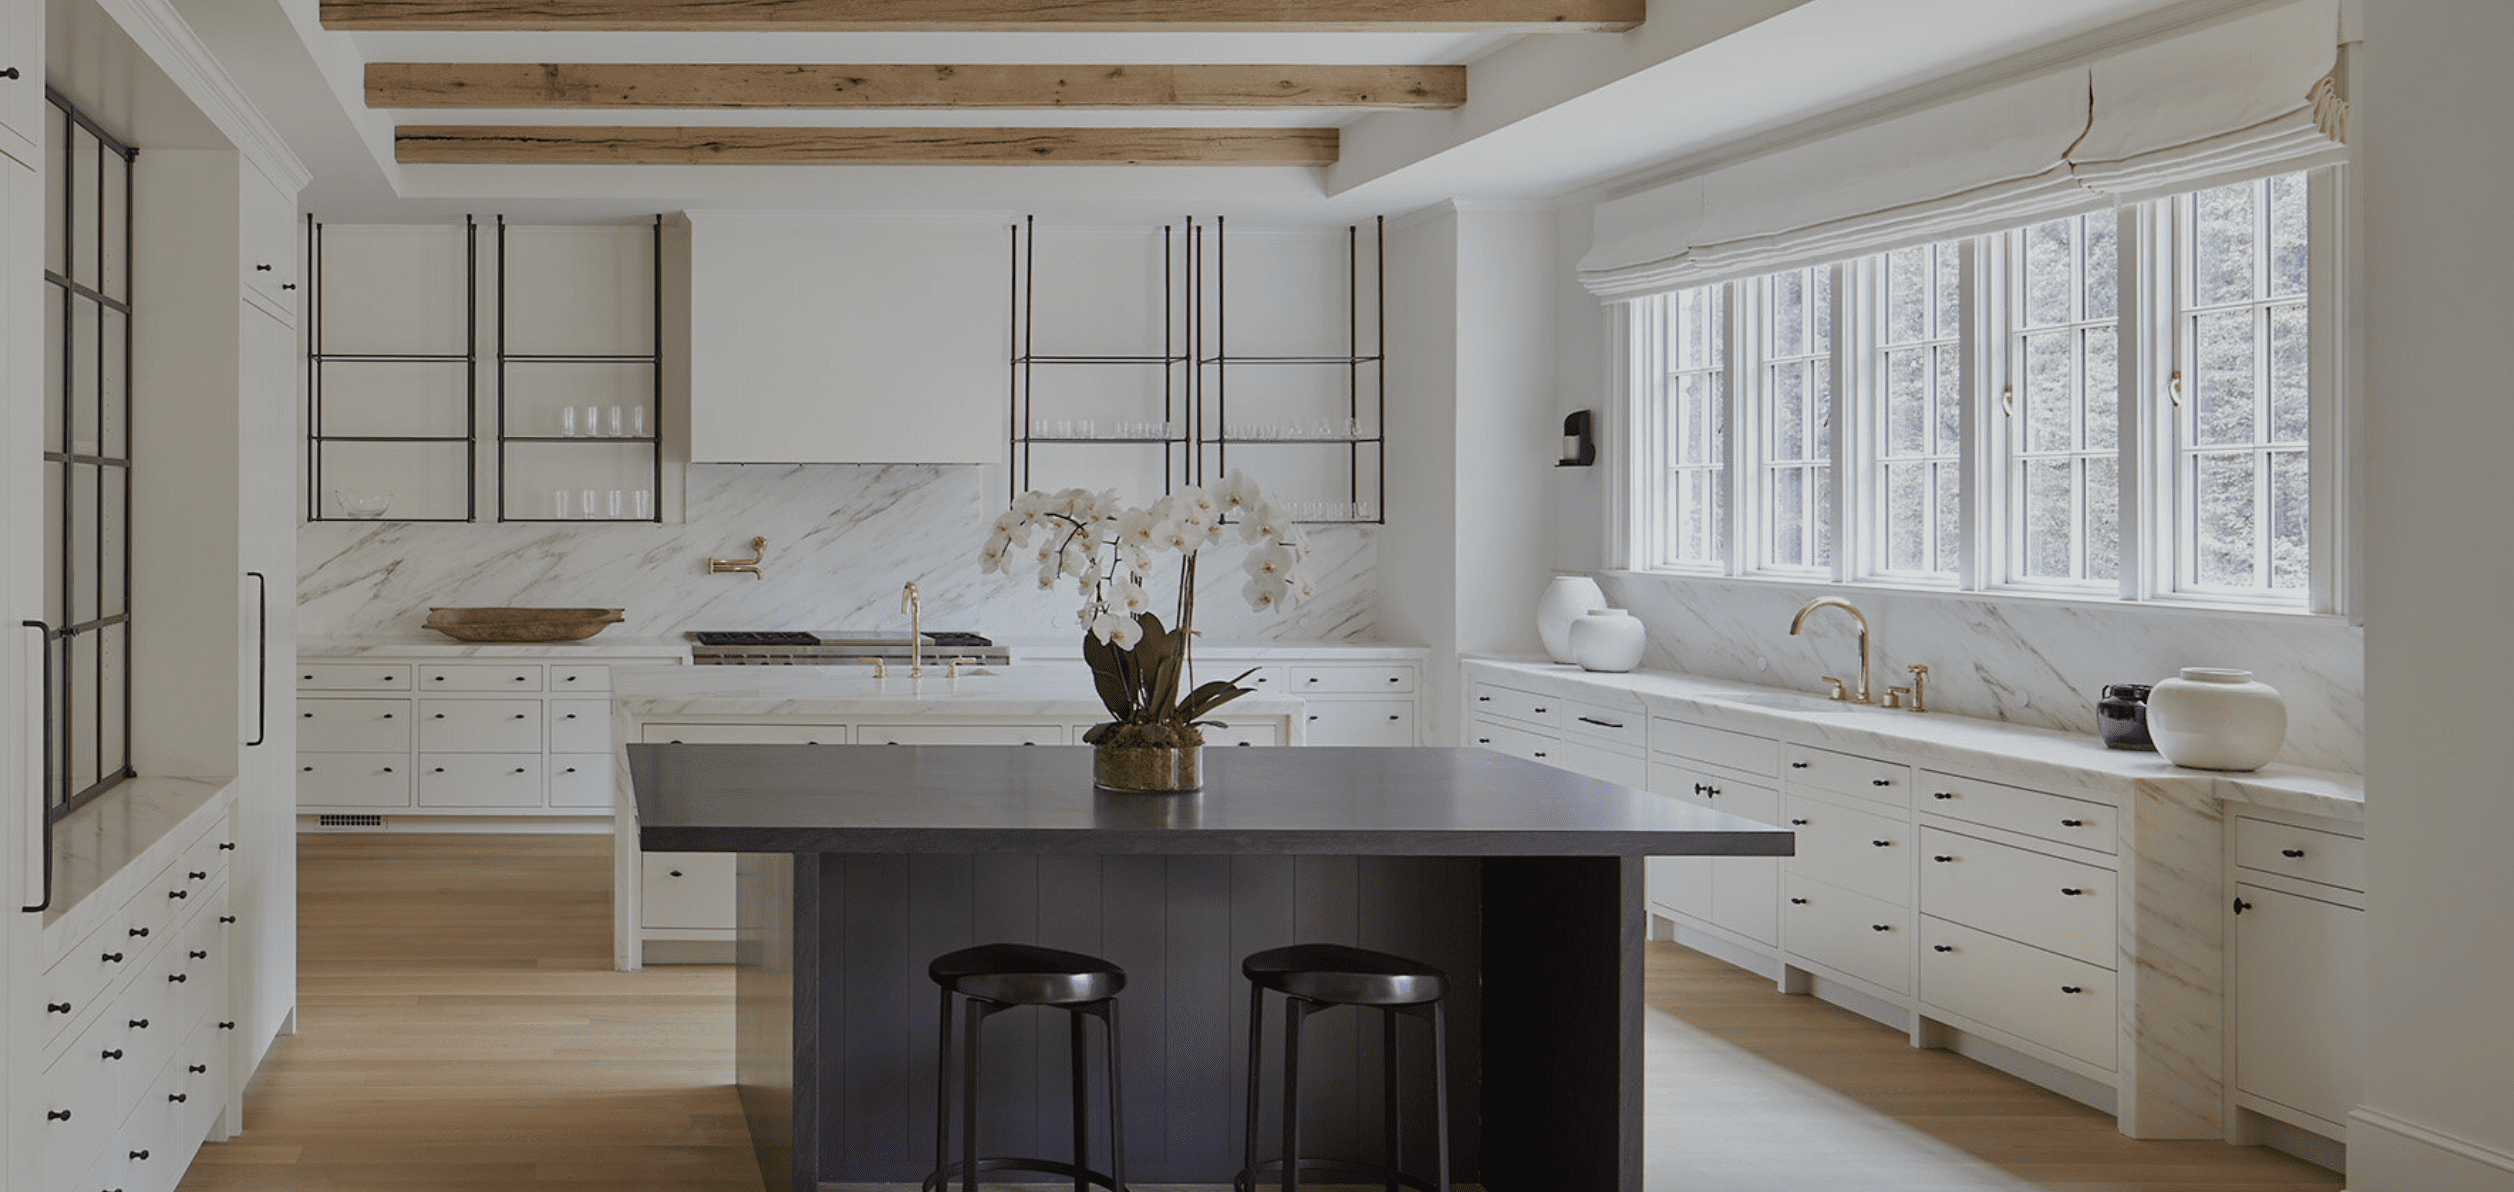 The Top Kitchen Design Trends to Look Out For in 25, According ...